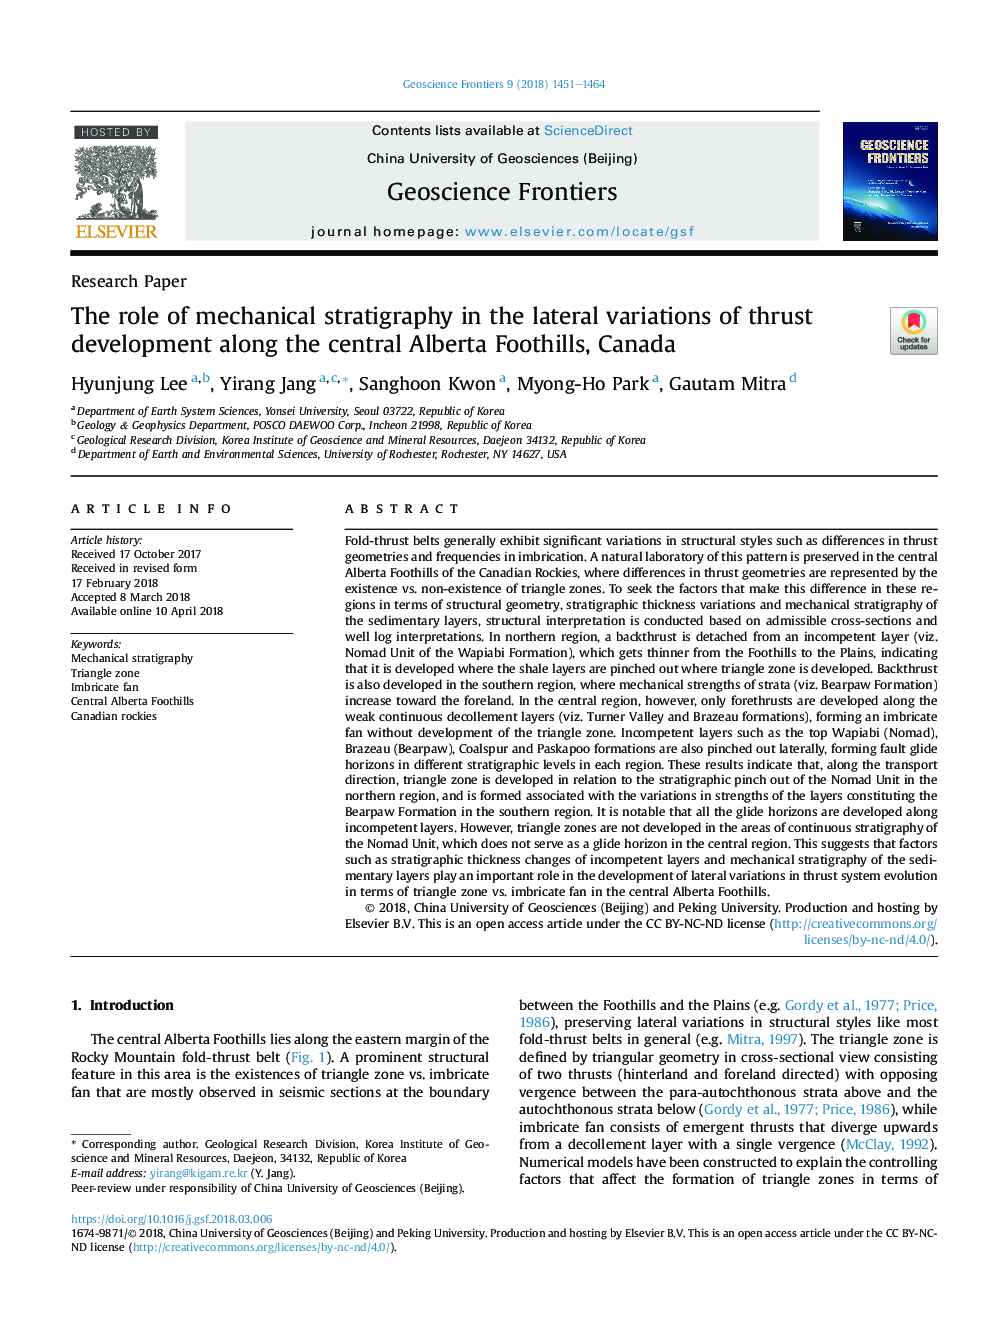 The role of mechanical stratigraphy in the lateral variations of thrust development along the central Alberta Foothills, Canada